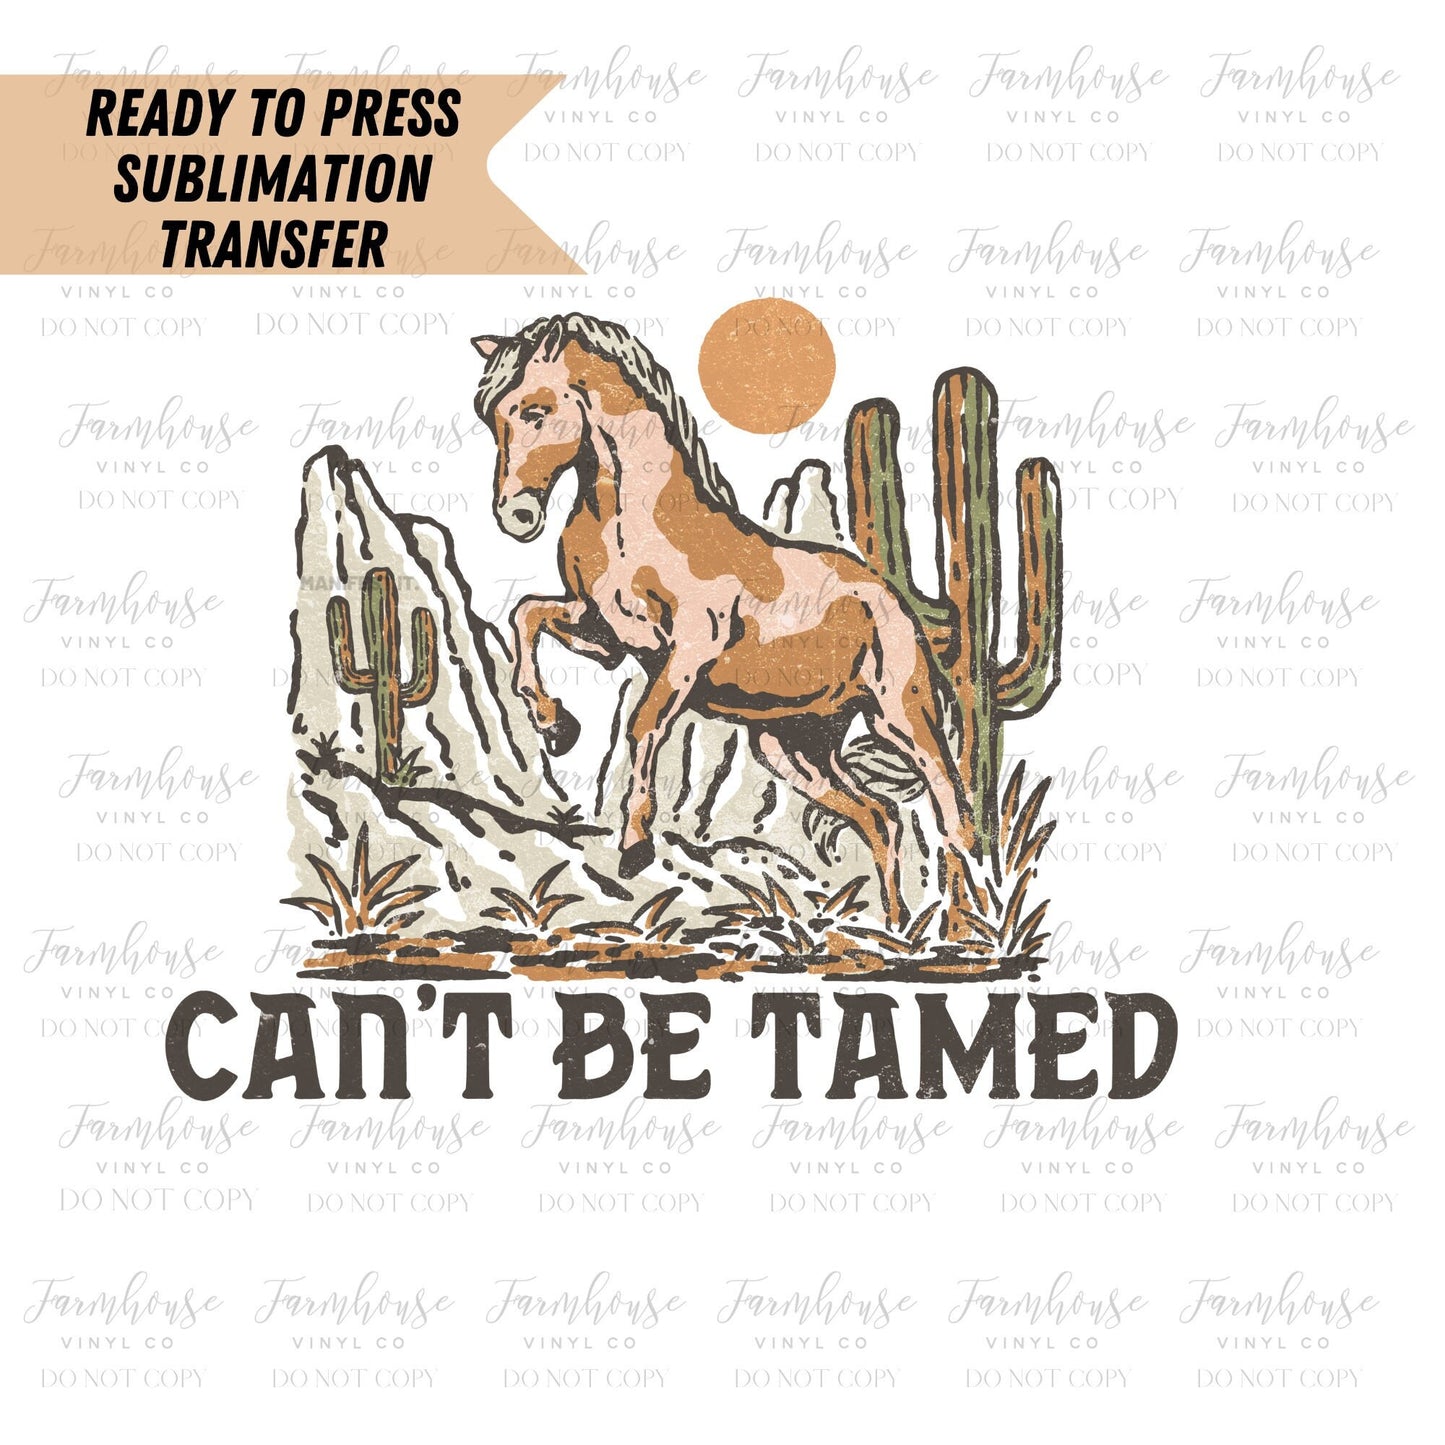 Can’t Be Tamed Ready To Press Sublimation Transfer - Farmhouse Vinyl Co